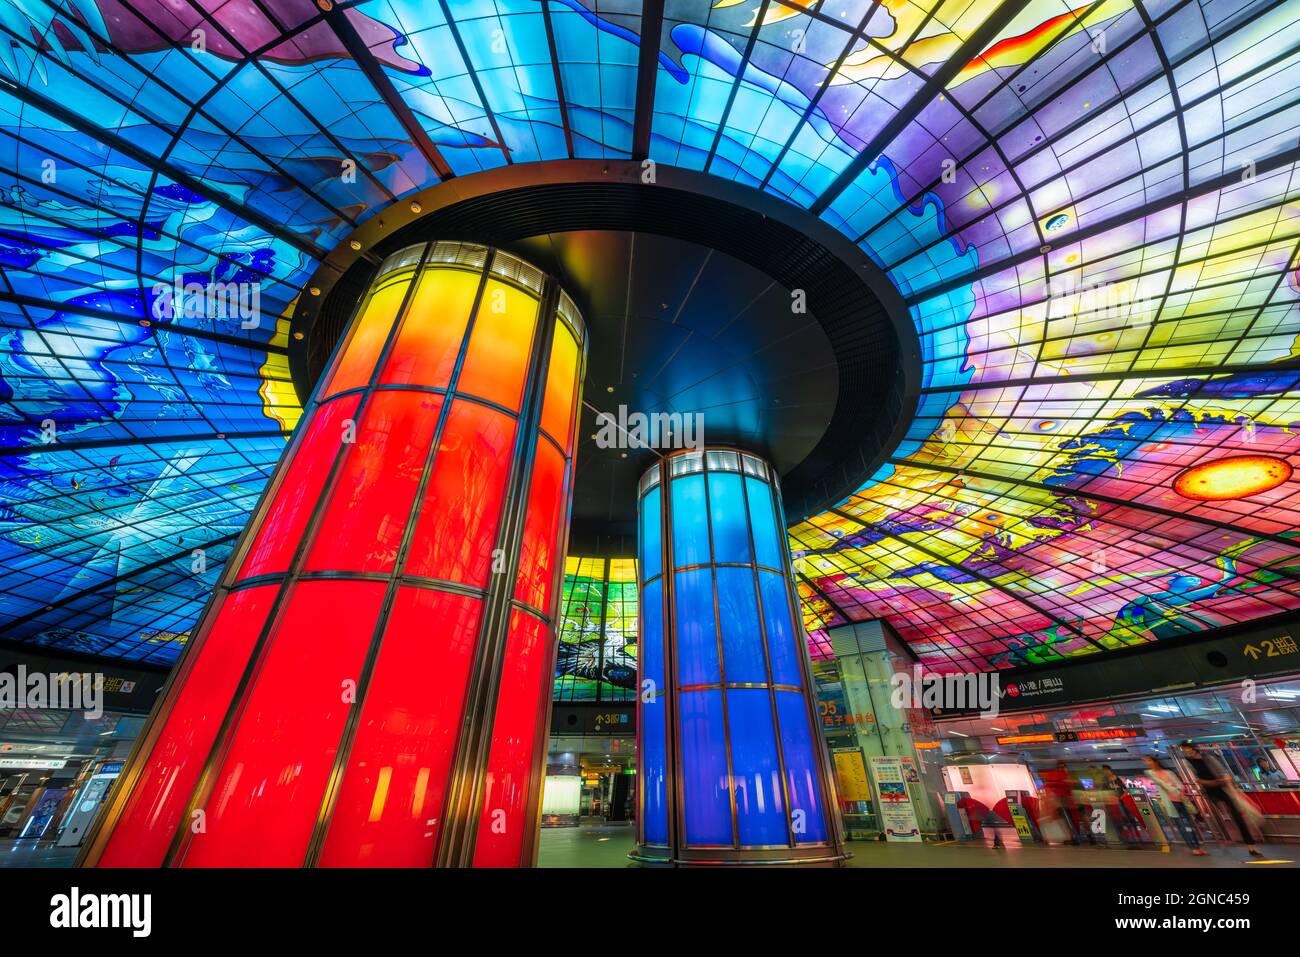 KAOHSIUNG, TAIWAN - MARCH 12, 2017: The Dome of Light at Formosa Boulevard Station. It is considered the largest glasswork in the world. Stock Photo